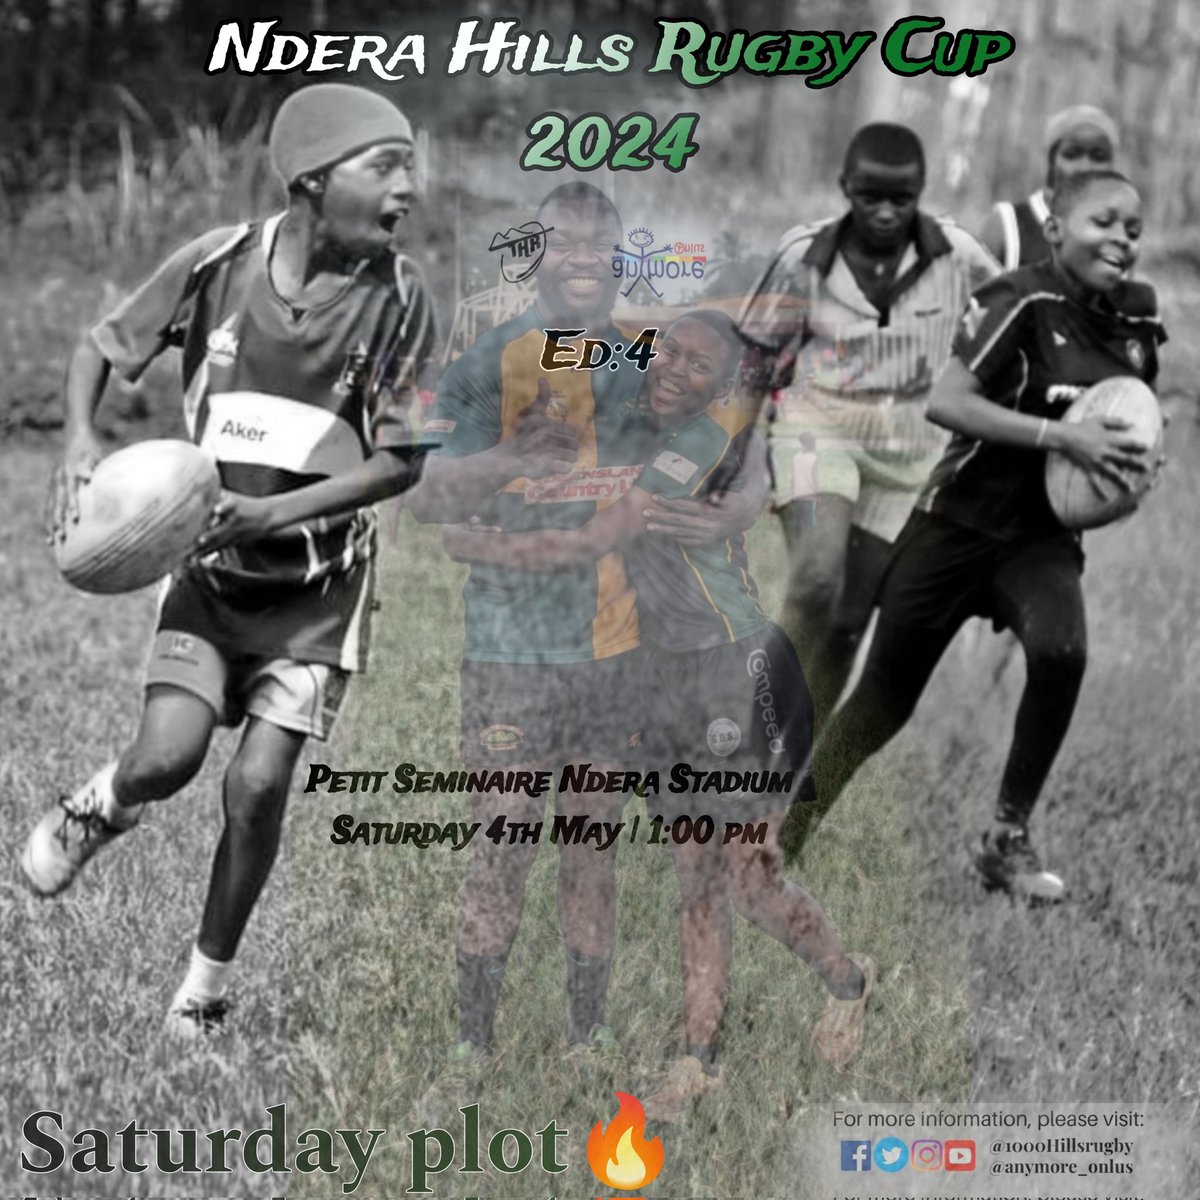 Saturday Rugby plot🔥😋

Ndera Hills Rugby Cup🏆

Avenue: Petit Seminaire Ndera Stadium, 1:00 pm

#1000hillsrugby #bikore #bikore10 
#dukinerugby #ImbaragaMubumwe #rugbyvalues #rugbyfamily #rwandarugbyleague #rugbyleague #letherplay #rugby #rwanda #serviziosociale #RwOT #RwaRugby